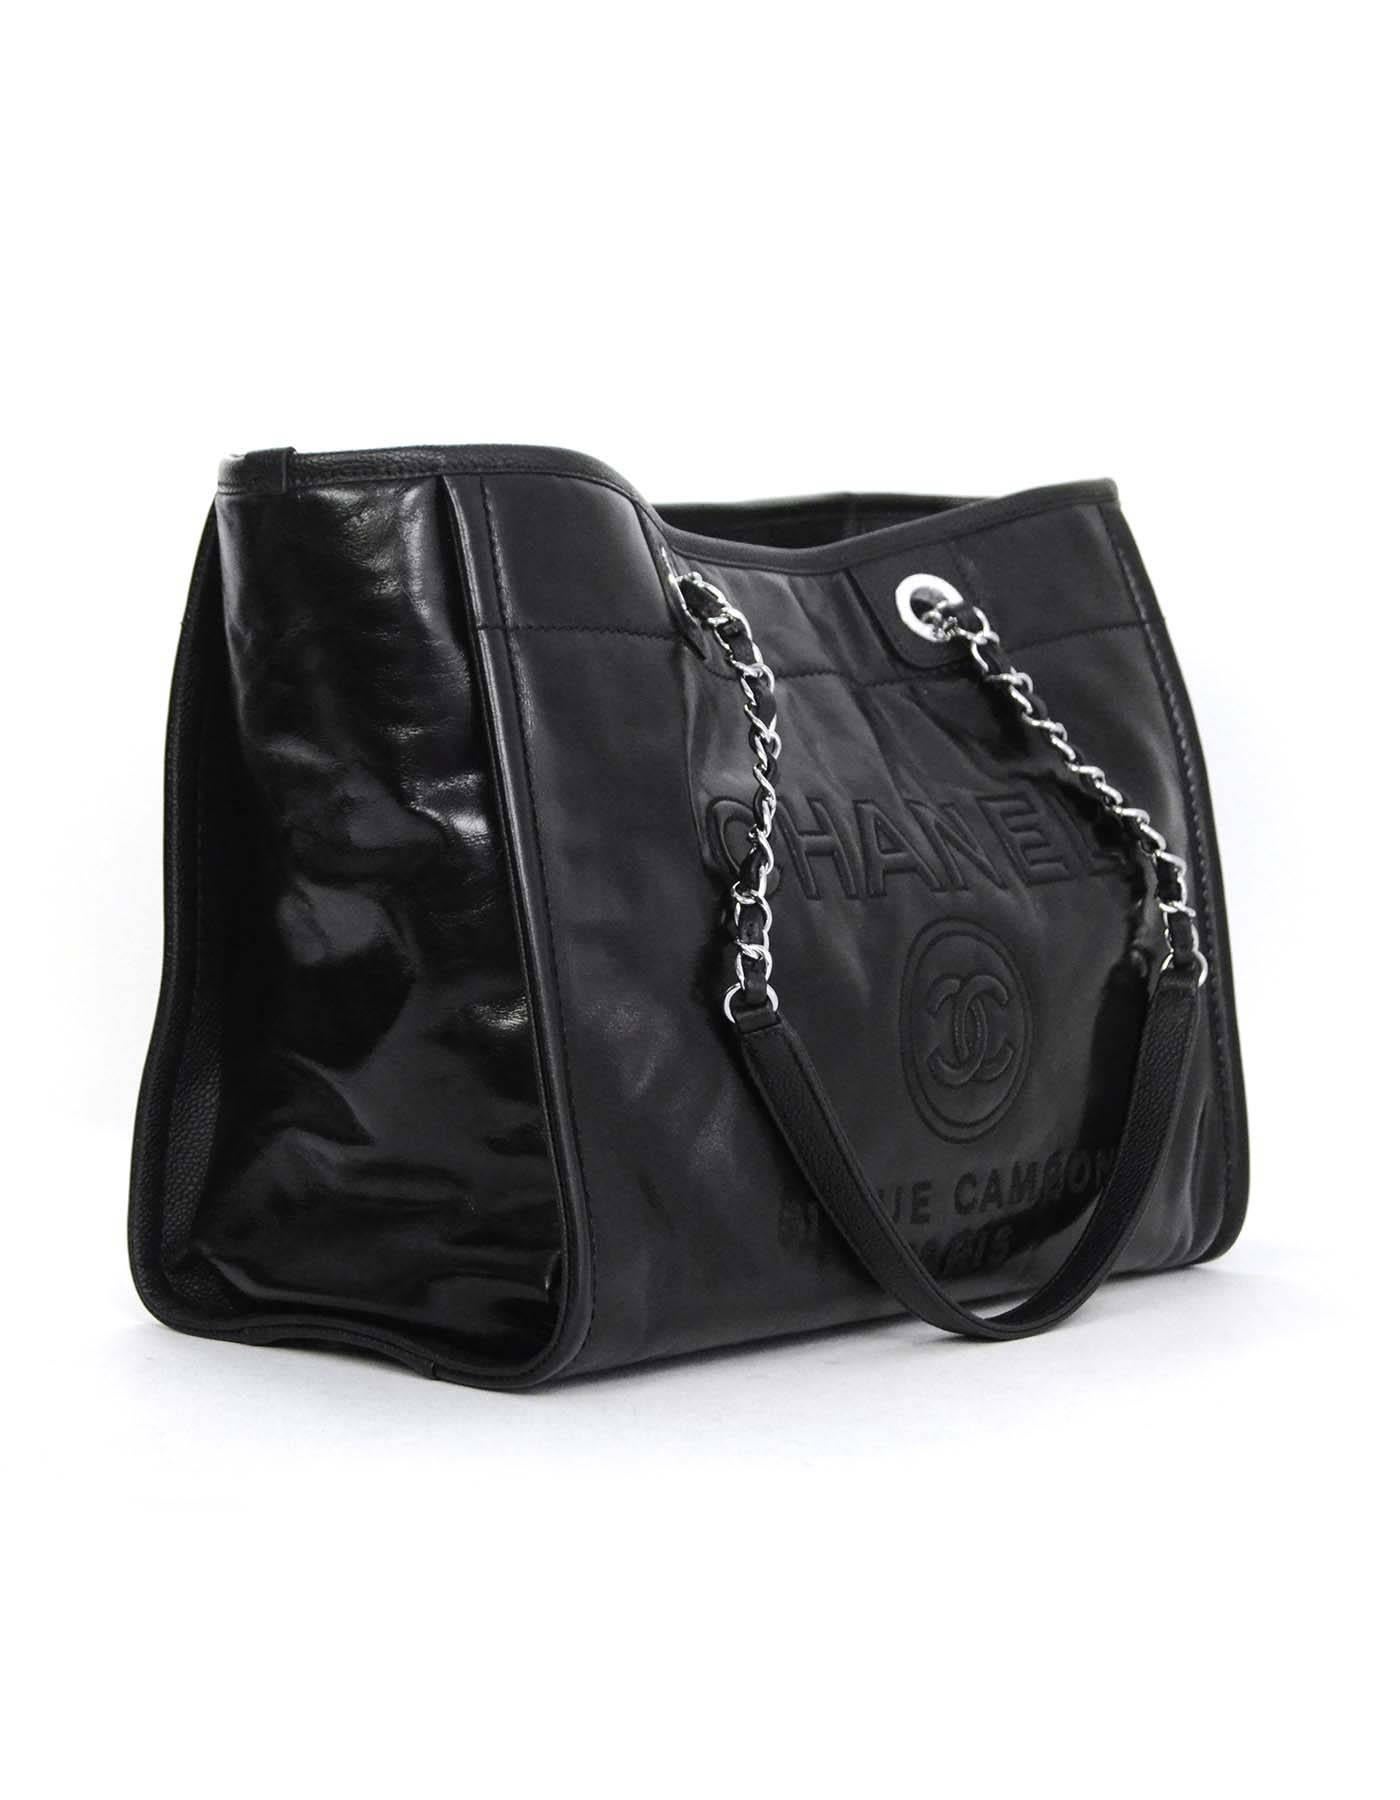 Features CHANEL 31 RUE CAMBON PARIS stitched front with back quilted patch pocket. Straps and top trim made of caviar leather.

    Made In: Italy
    Year of Production: 2016
    Color: Black
    Hardware: Silvertone
    Materials: Calfksin